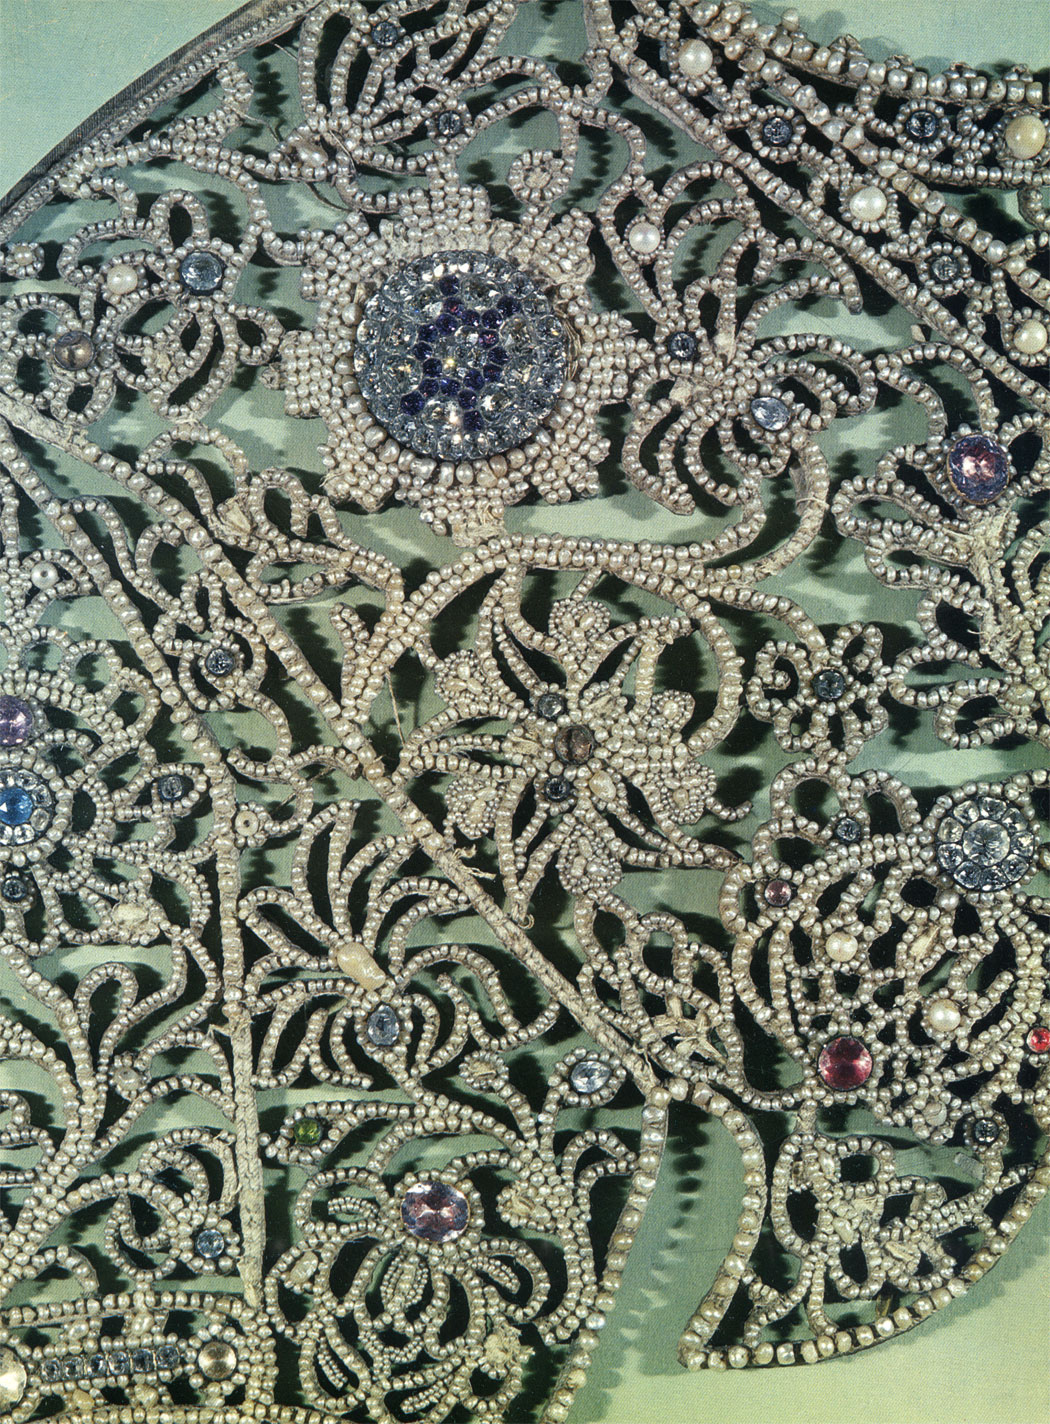 Detail of the riza